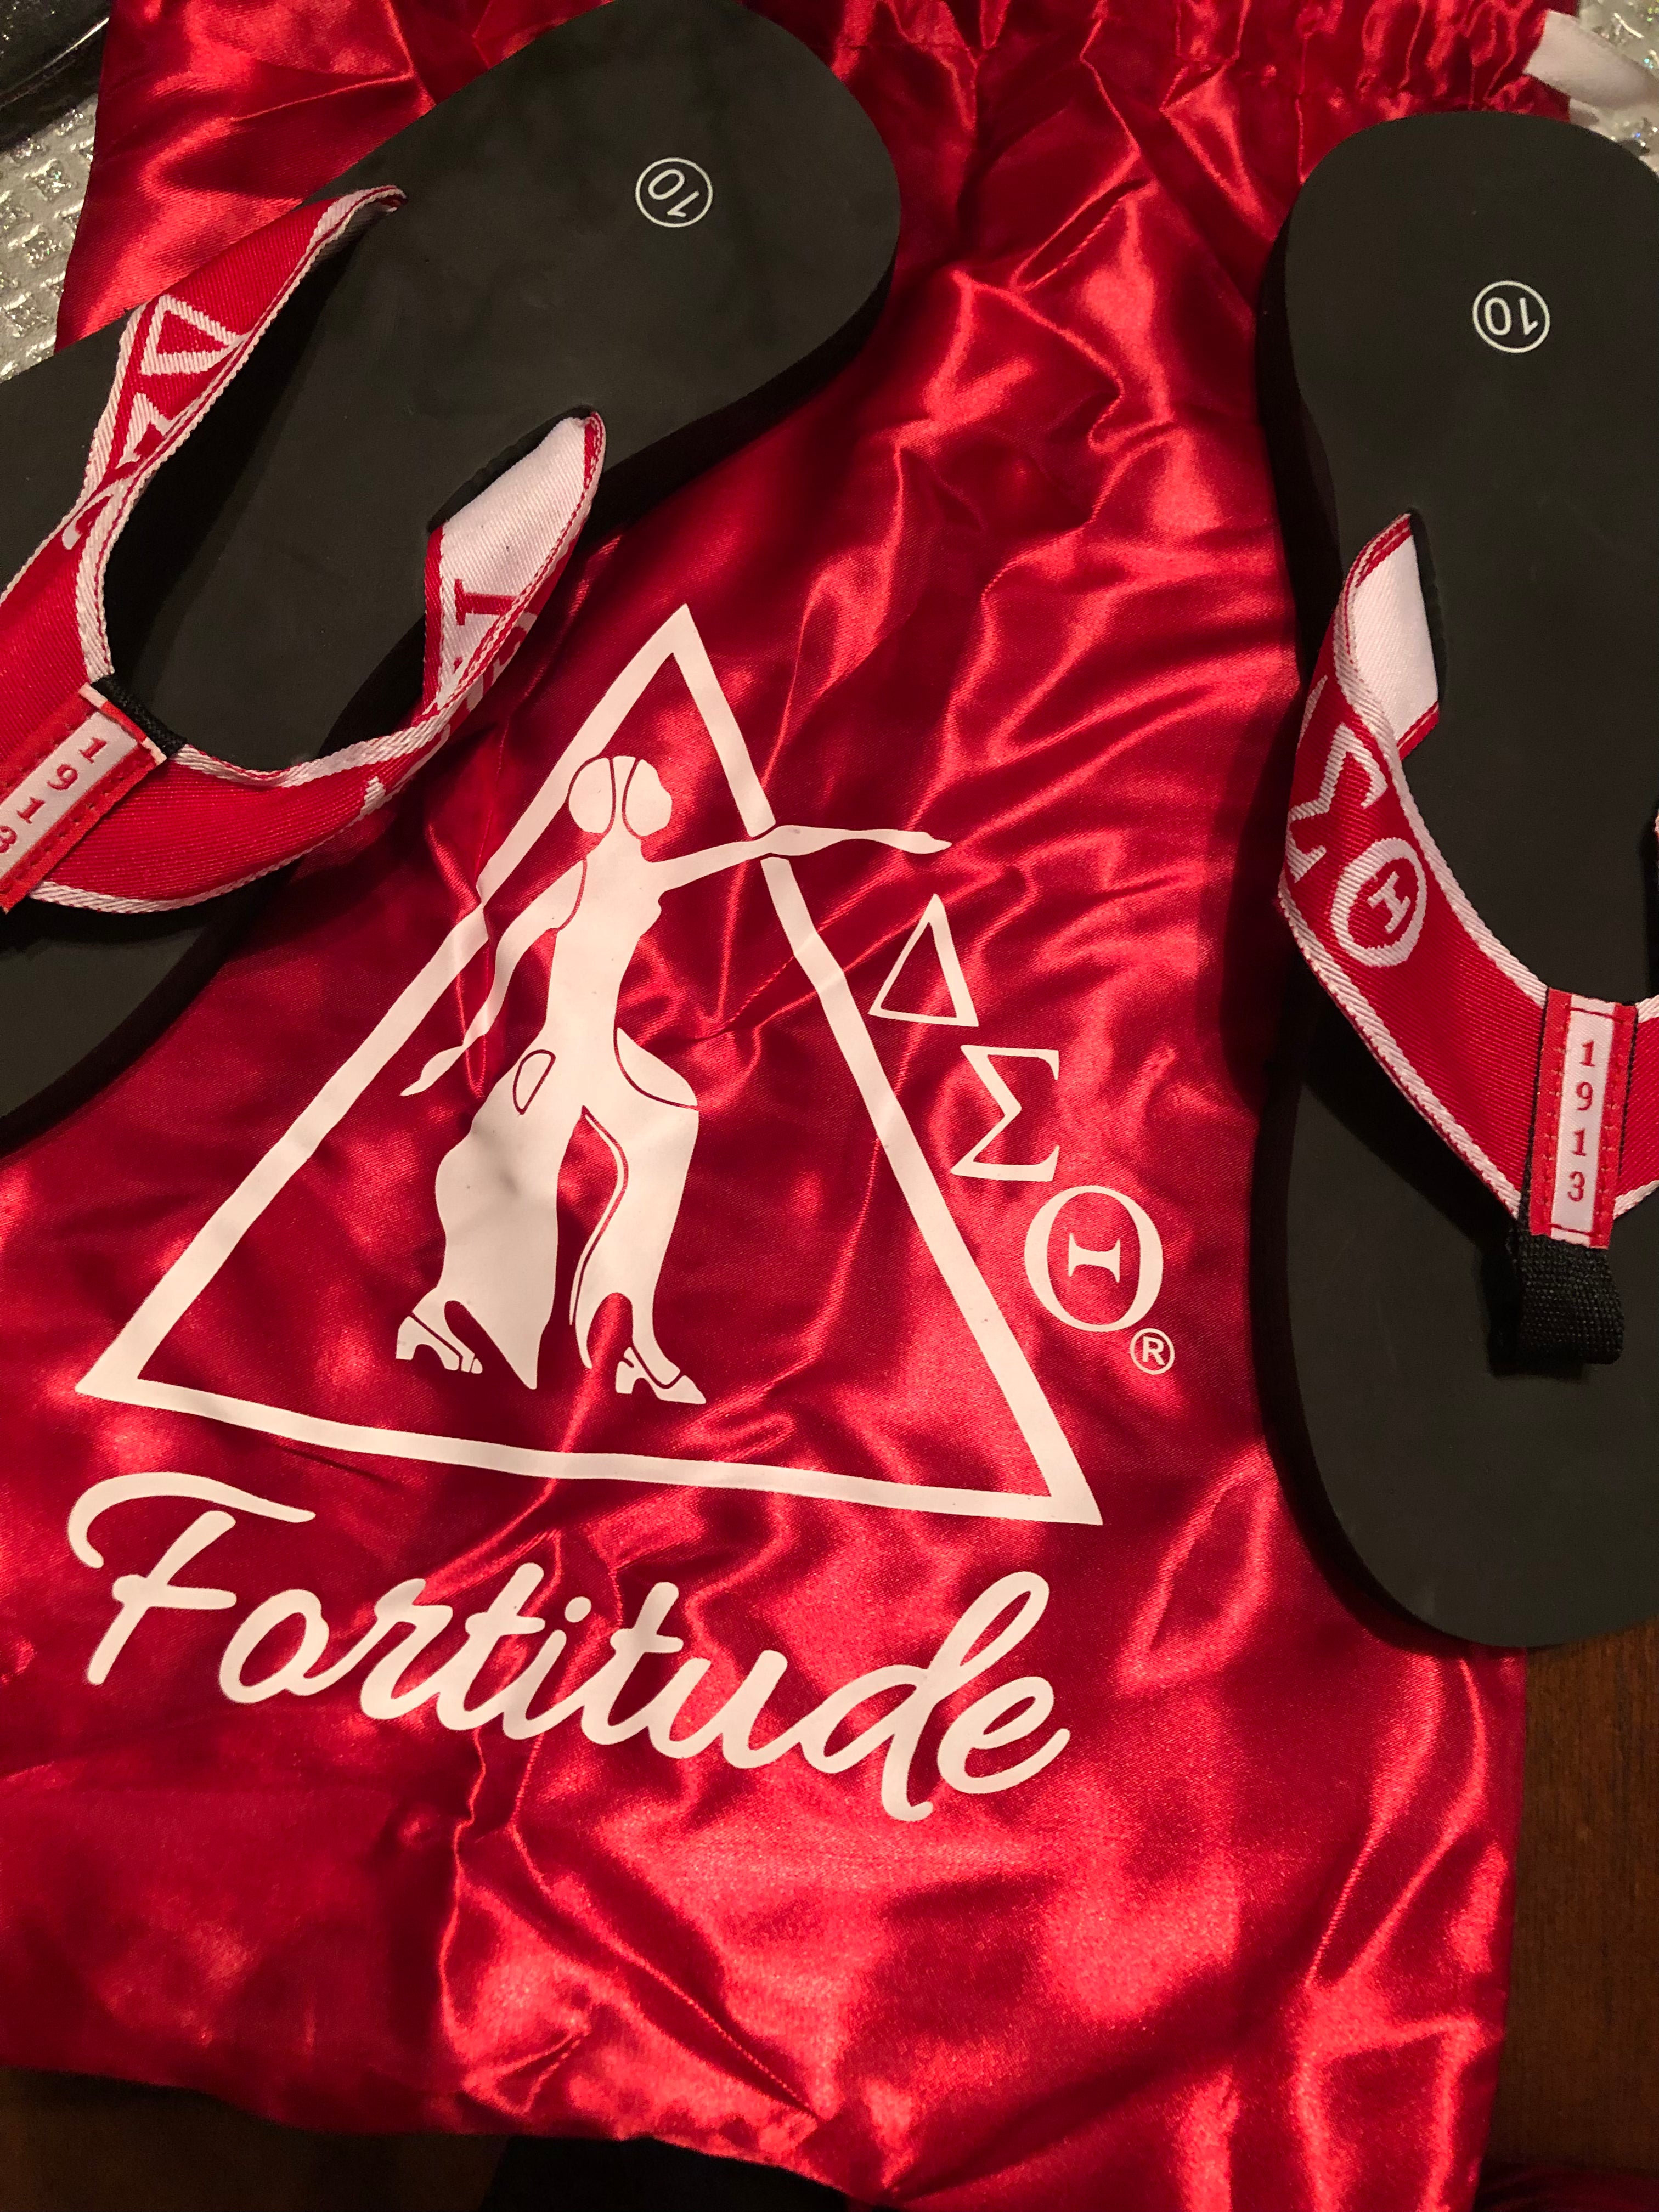 DST flip flops. comes with this beautiful red fortitude drawstring bag.    